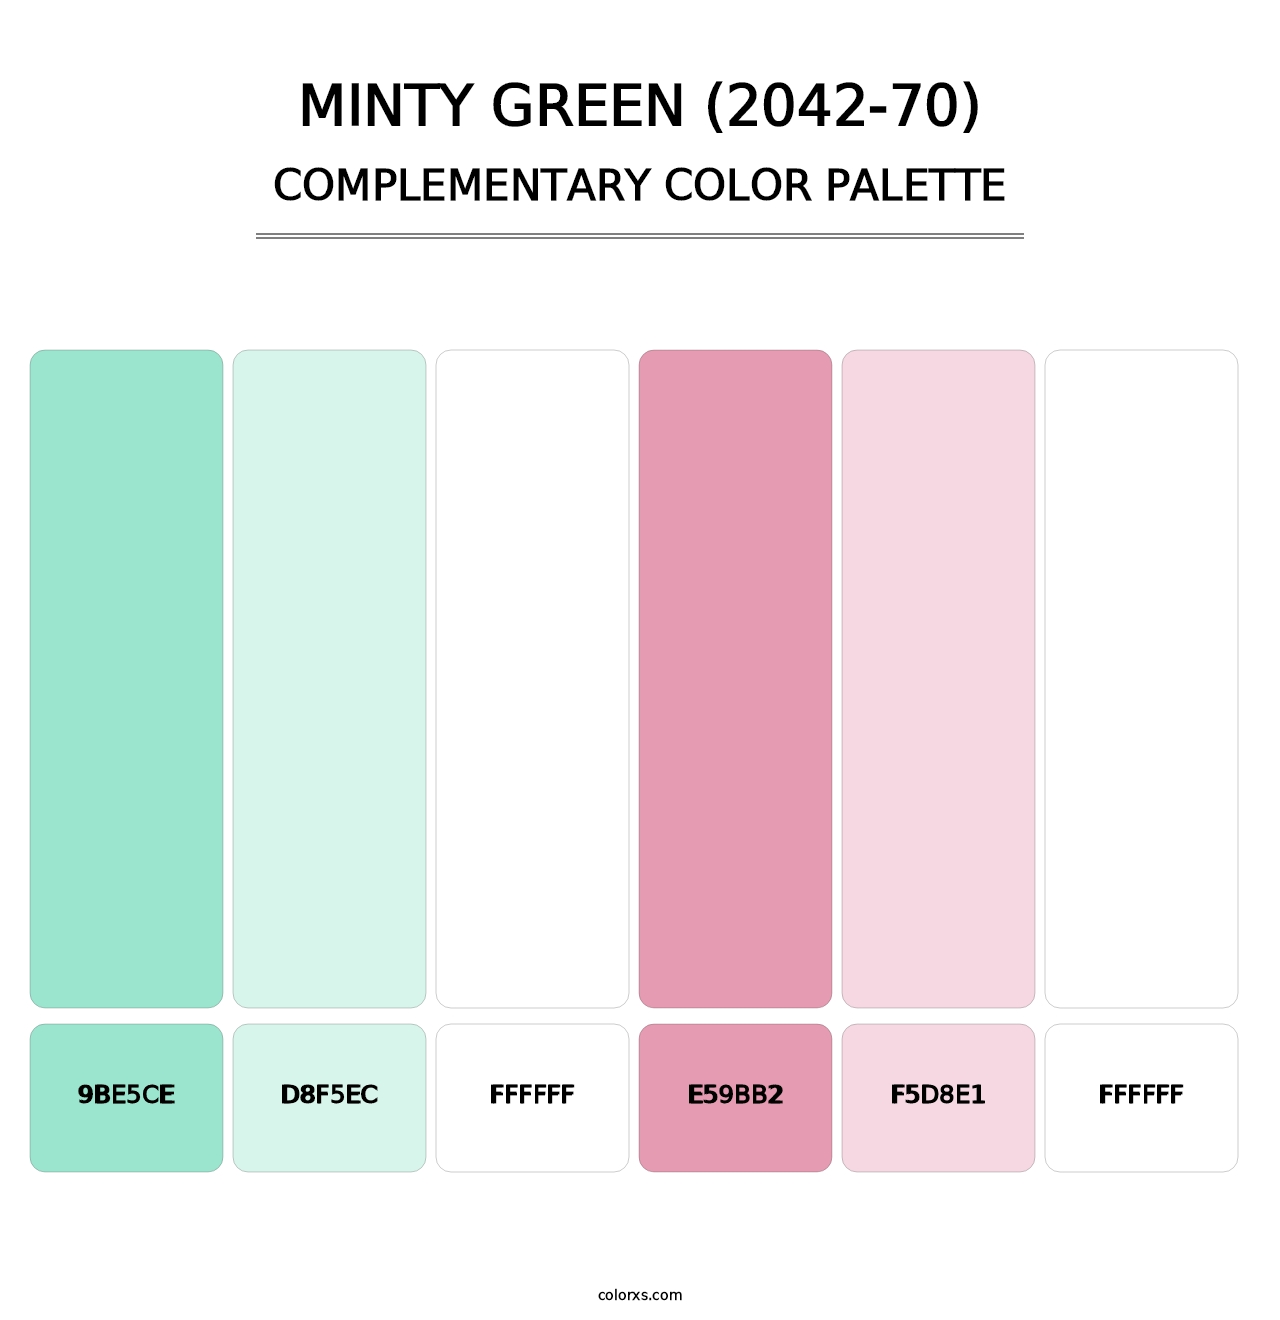 Minty Green (2042-70) - Complementary Color Palette